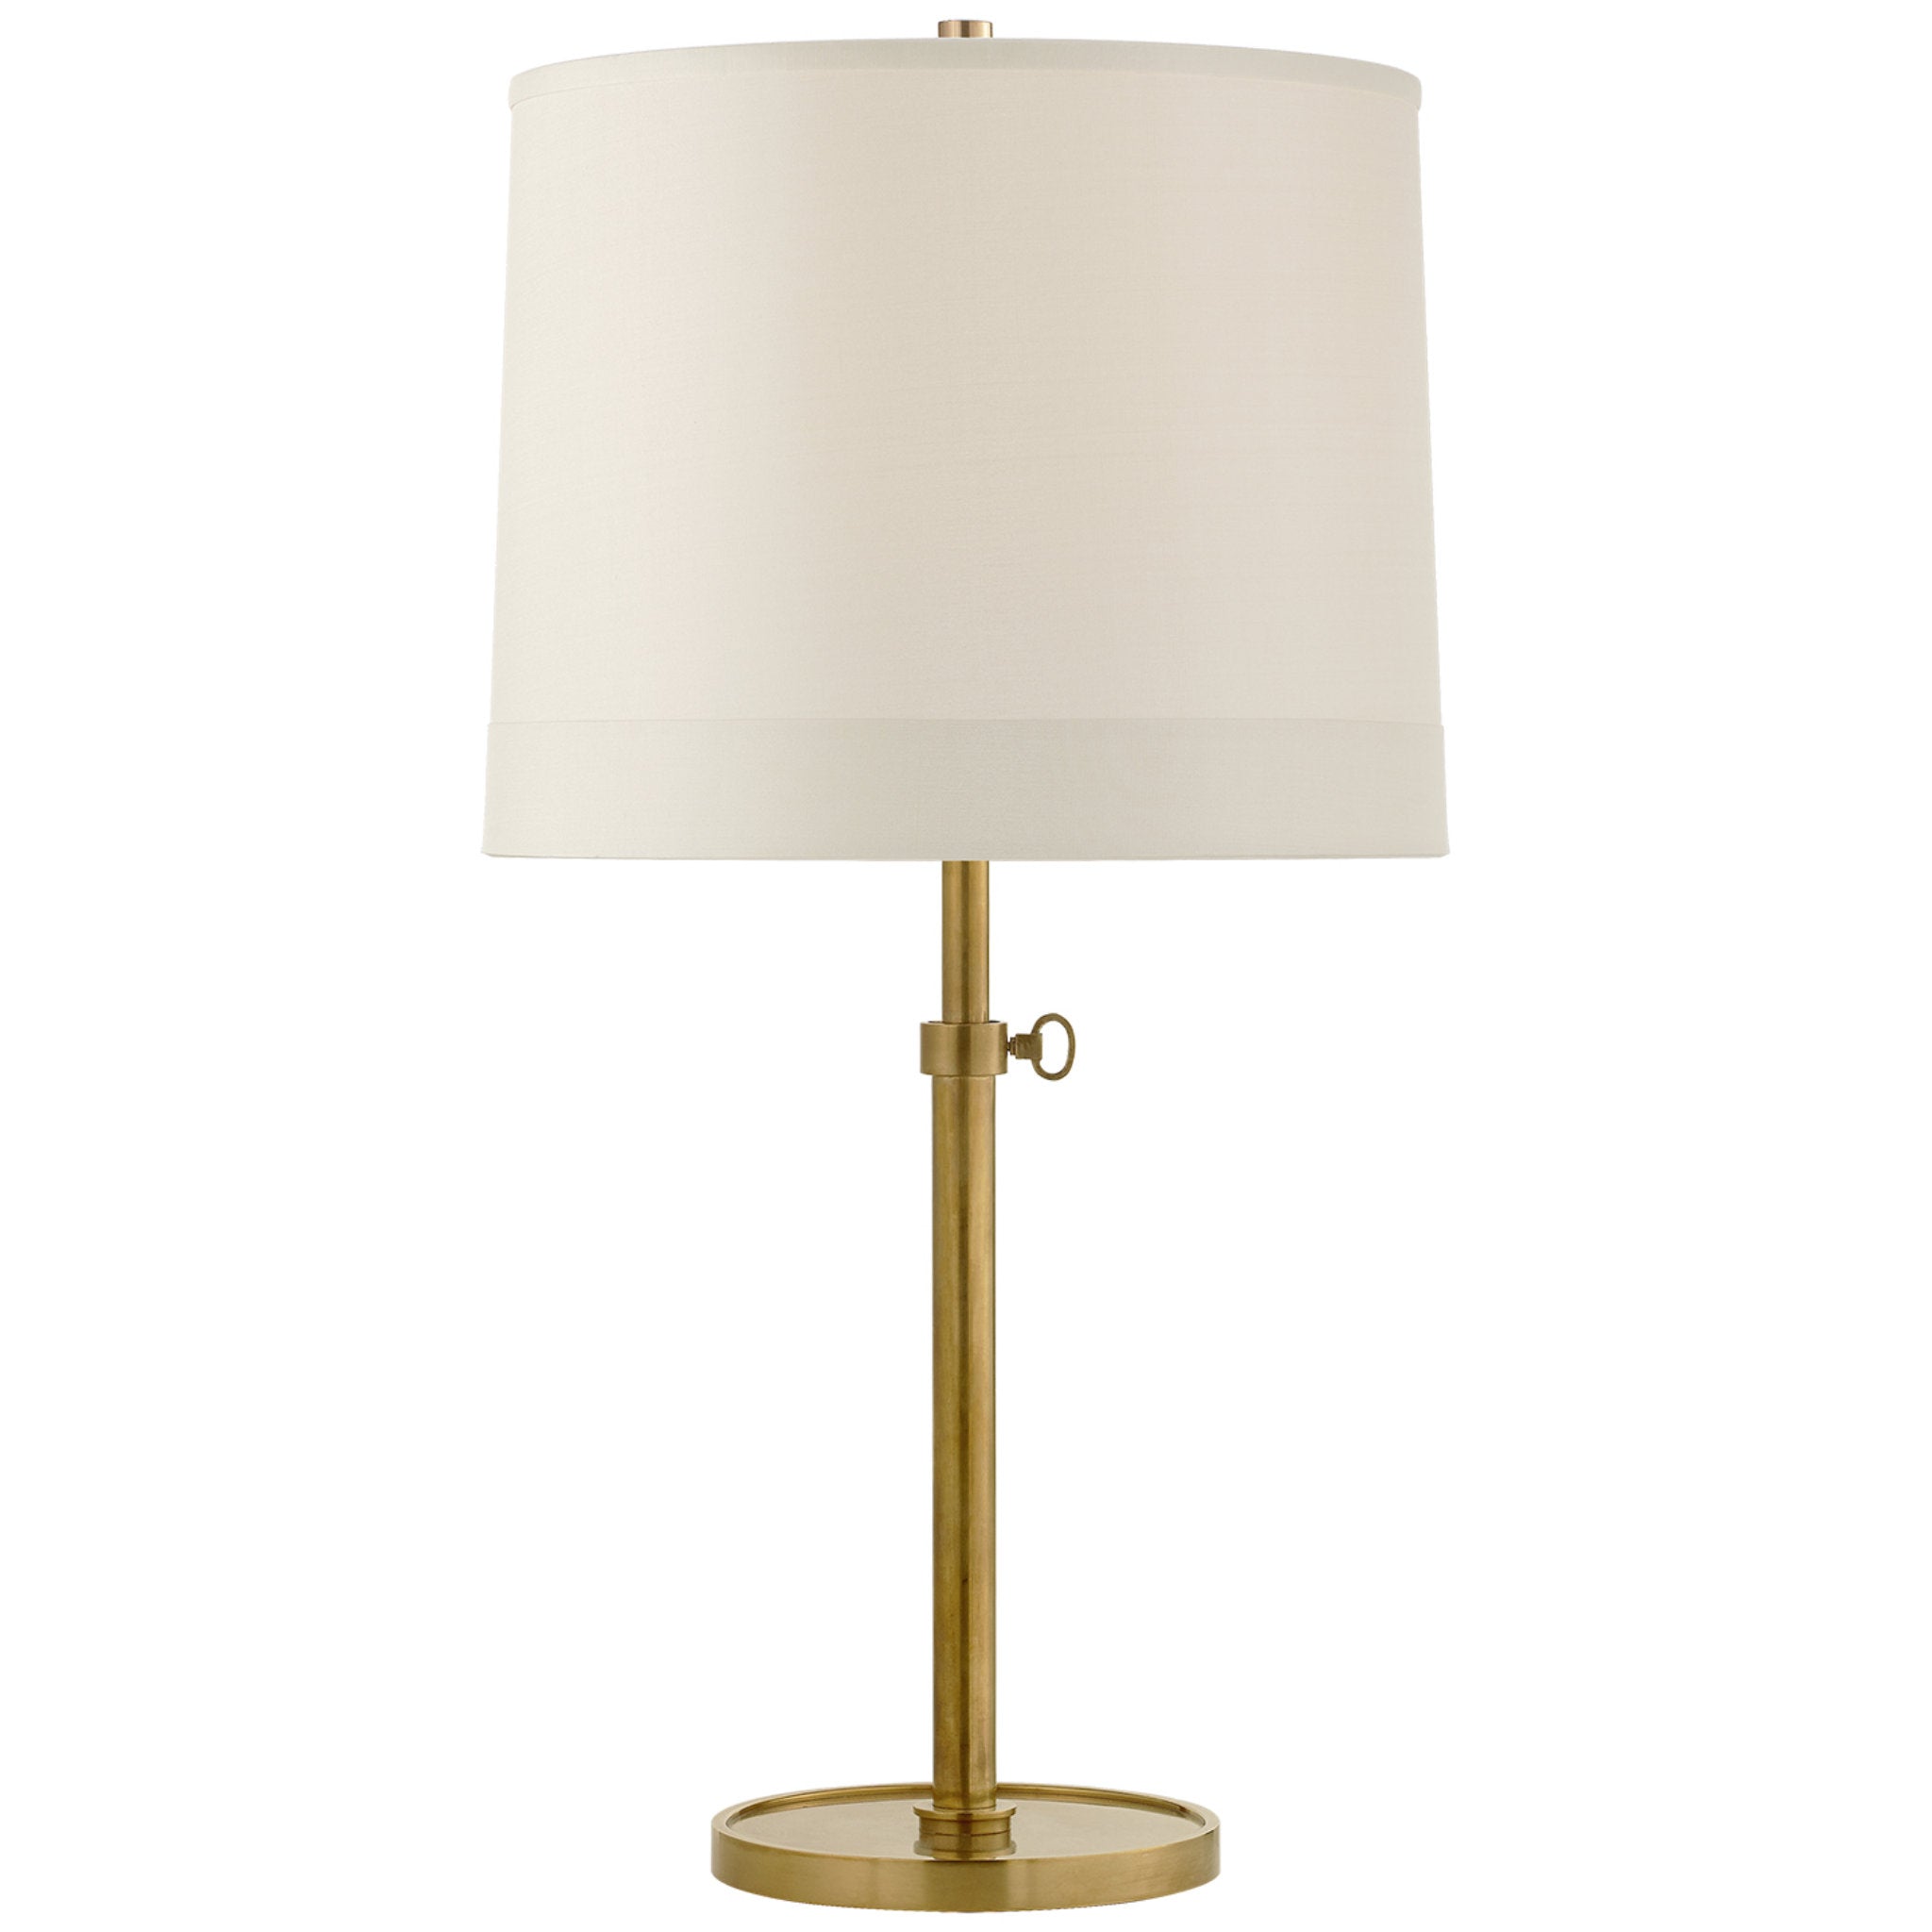 Barbara Barry Simple Adjustable Table Lamp in Soft Brass with Silk Banded Shade